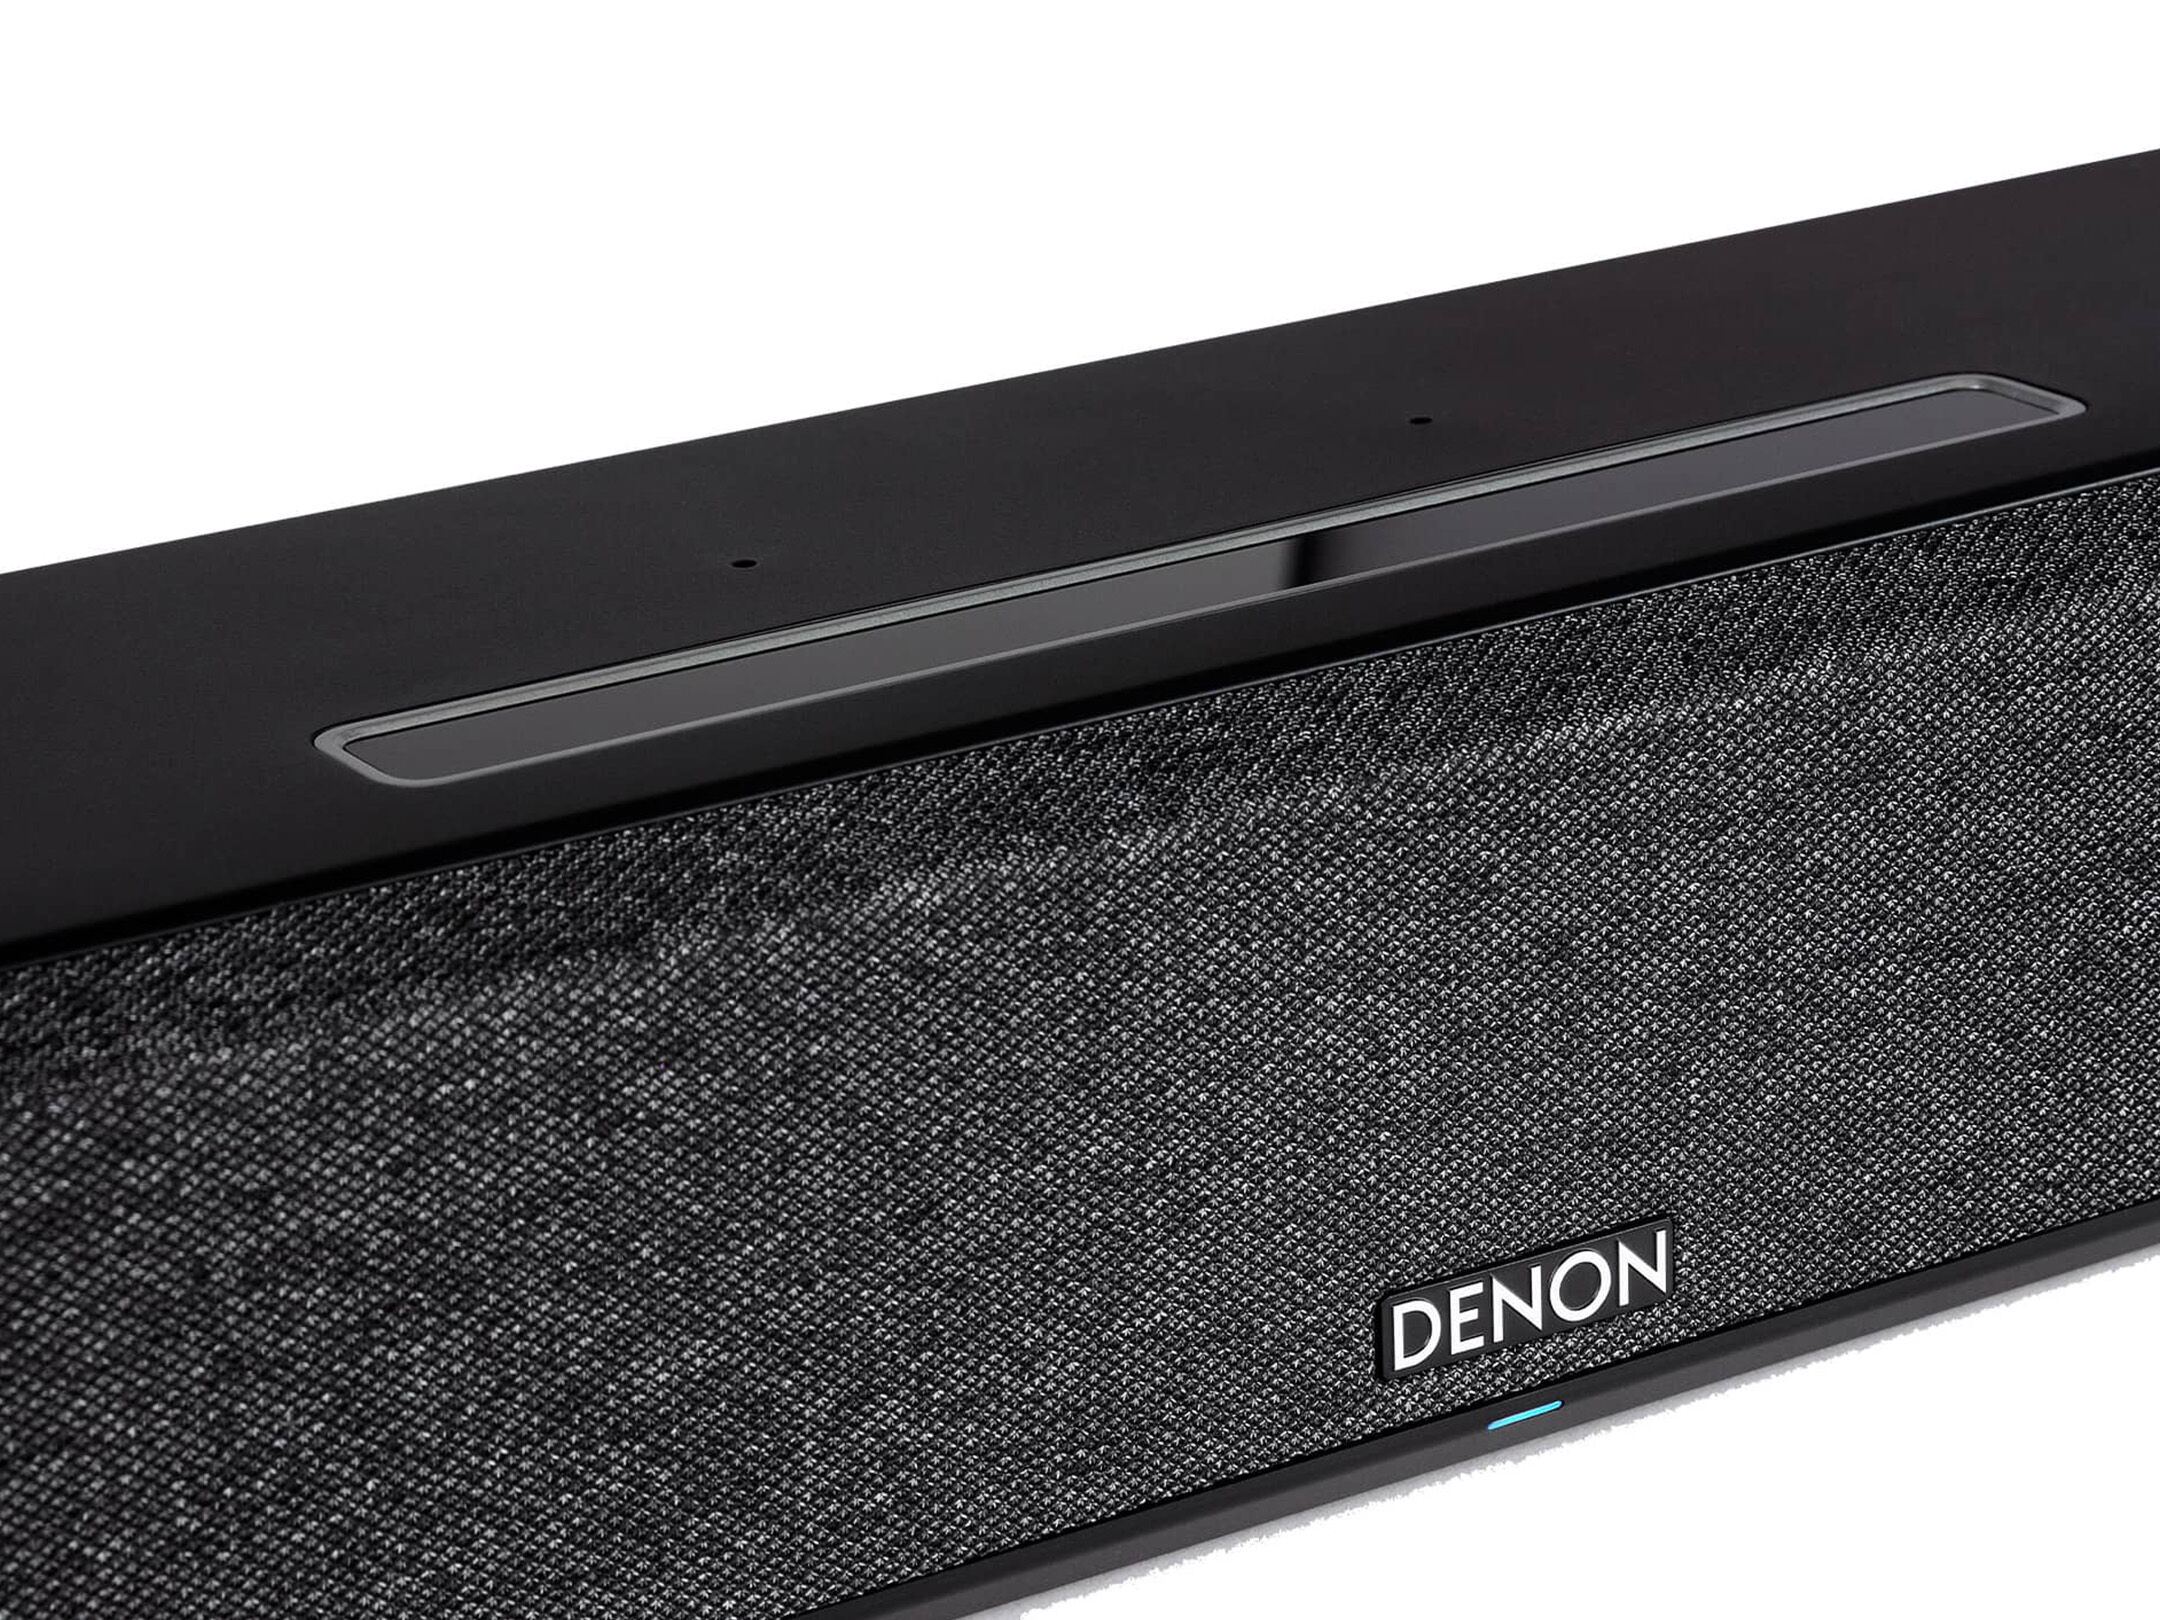 Denon Home Sound Bar 550 - Smart Sound Bar with Dolby Atmos and 